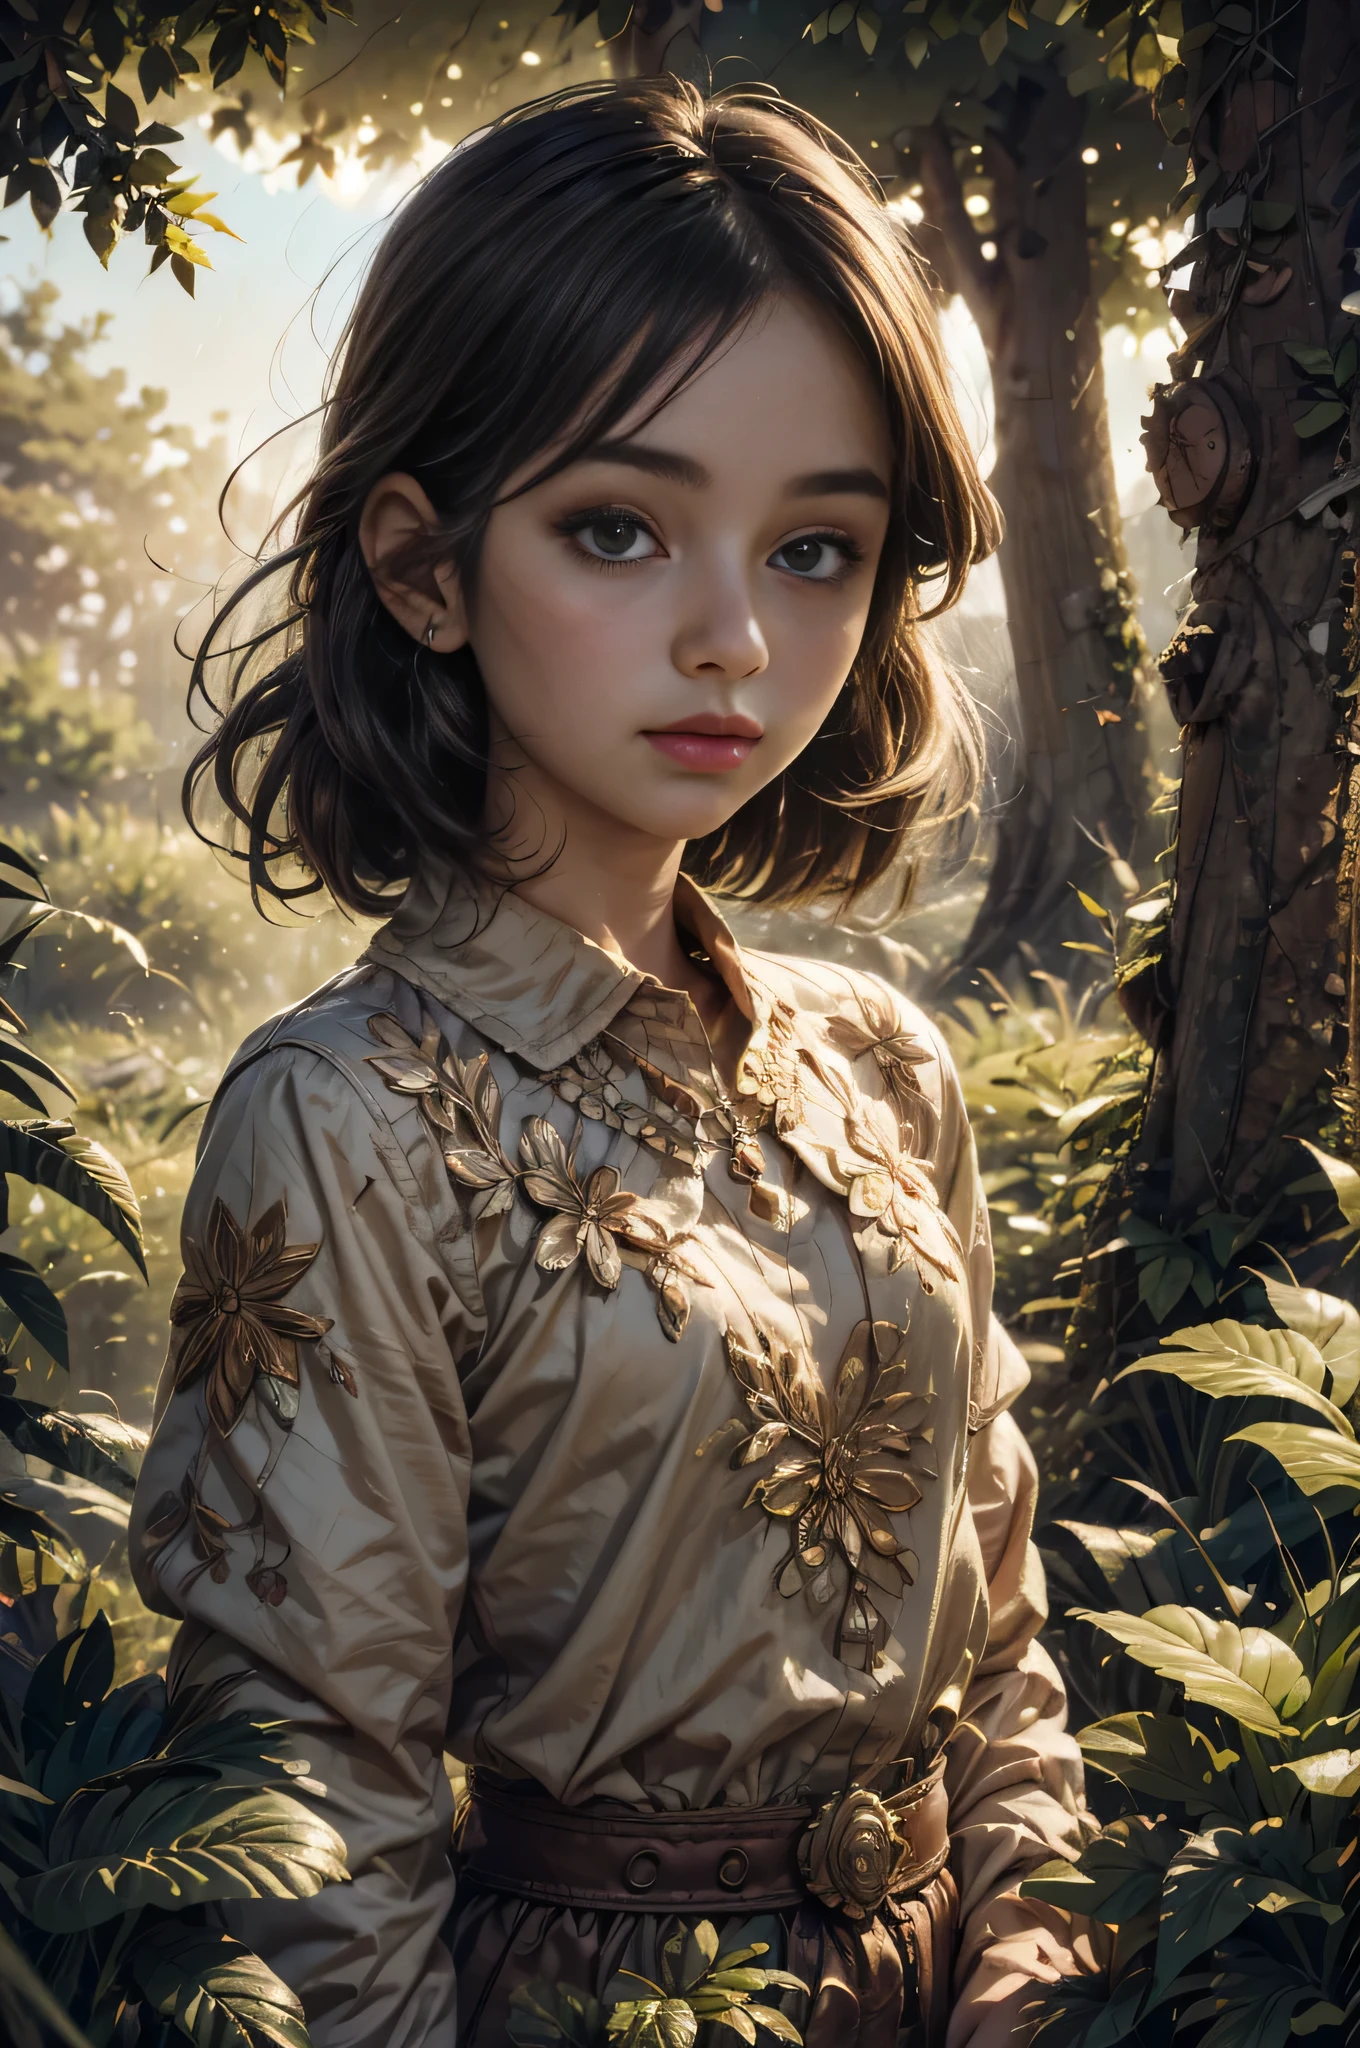 exquisite details, surreal atmosphere, ethereal beauty, vibrant colors, soft lighting, fantasy theme, mystical presence, delicate foliage, flowing hair, intricate patterns, dreamlike quality, captivating gaze, flat illustration